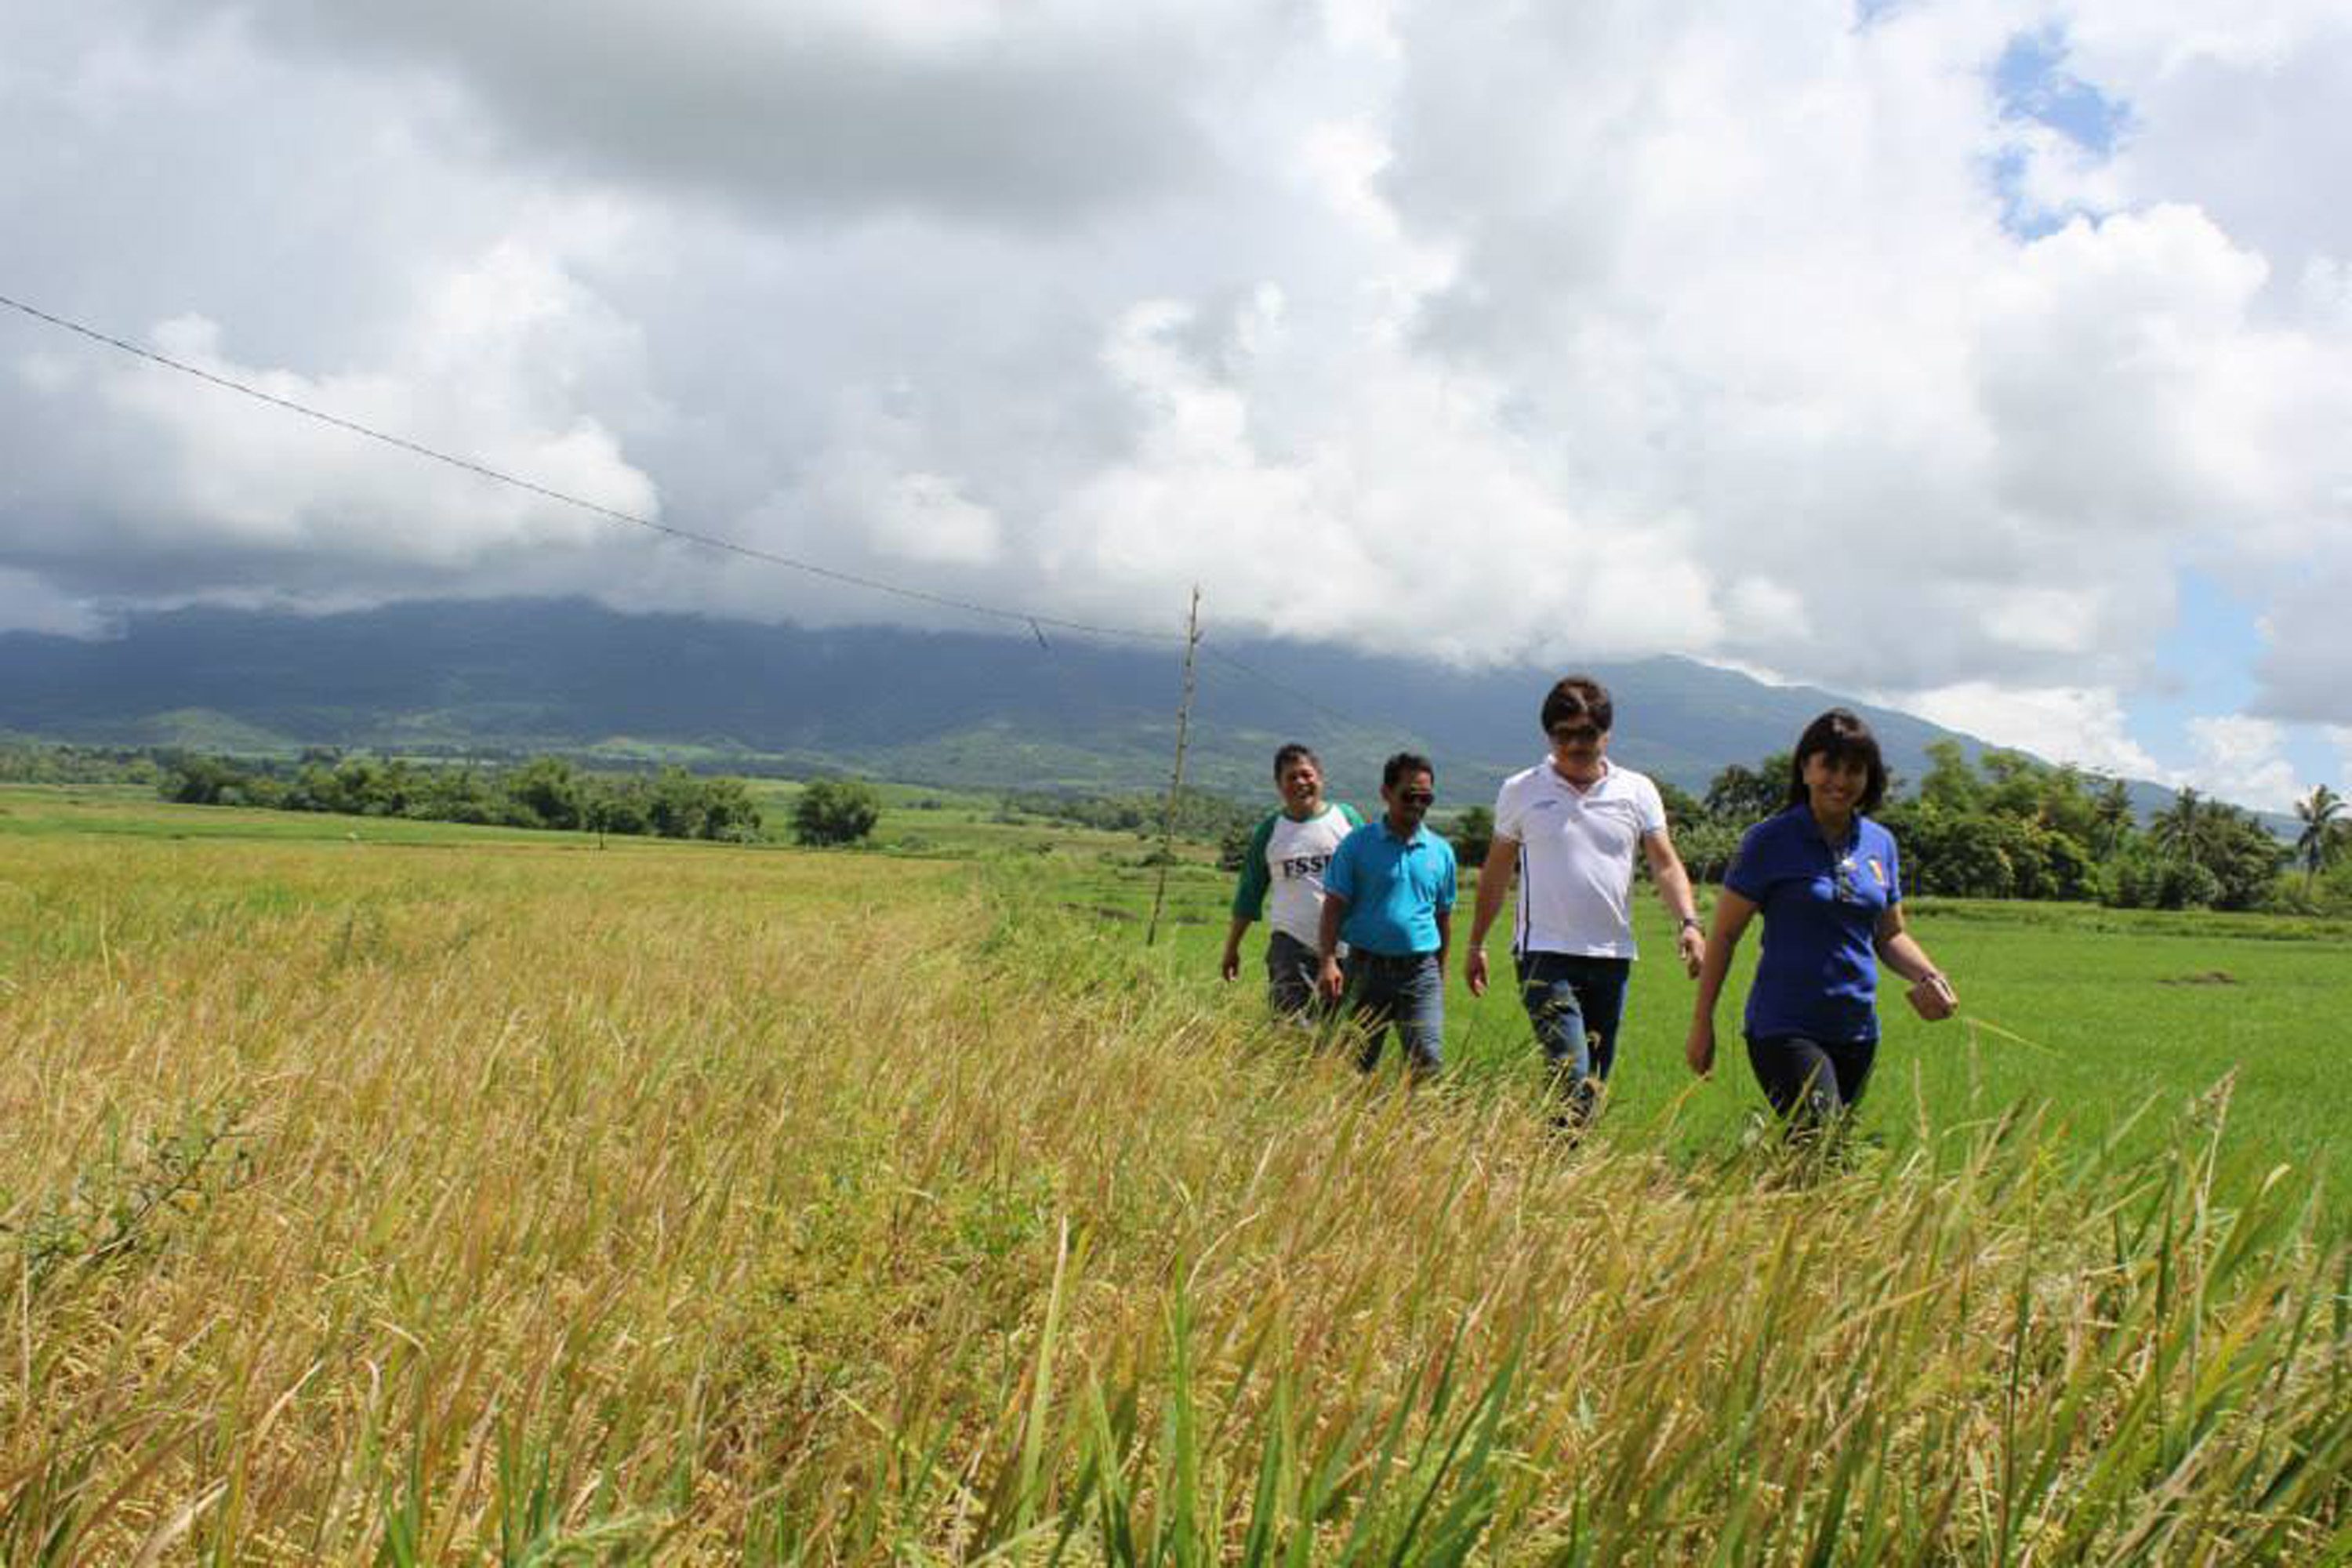 FARMERS' CHAMPION. Leni Robredo is known for often visiting farmers, even if she has to walk long distances. She has initiated several irrigation projects in her district in two years. Photo by Rhaydz Barcia/Rappler 